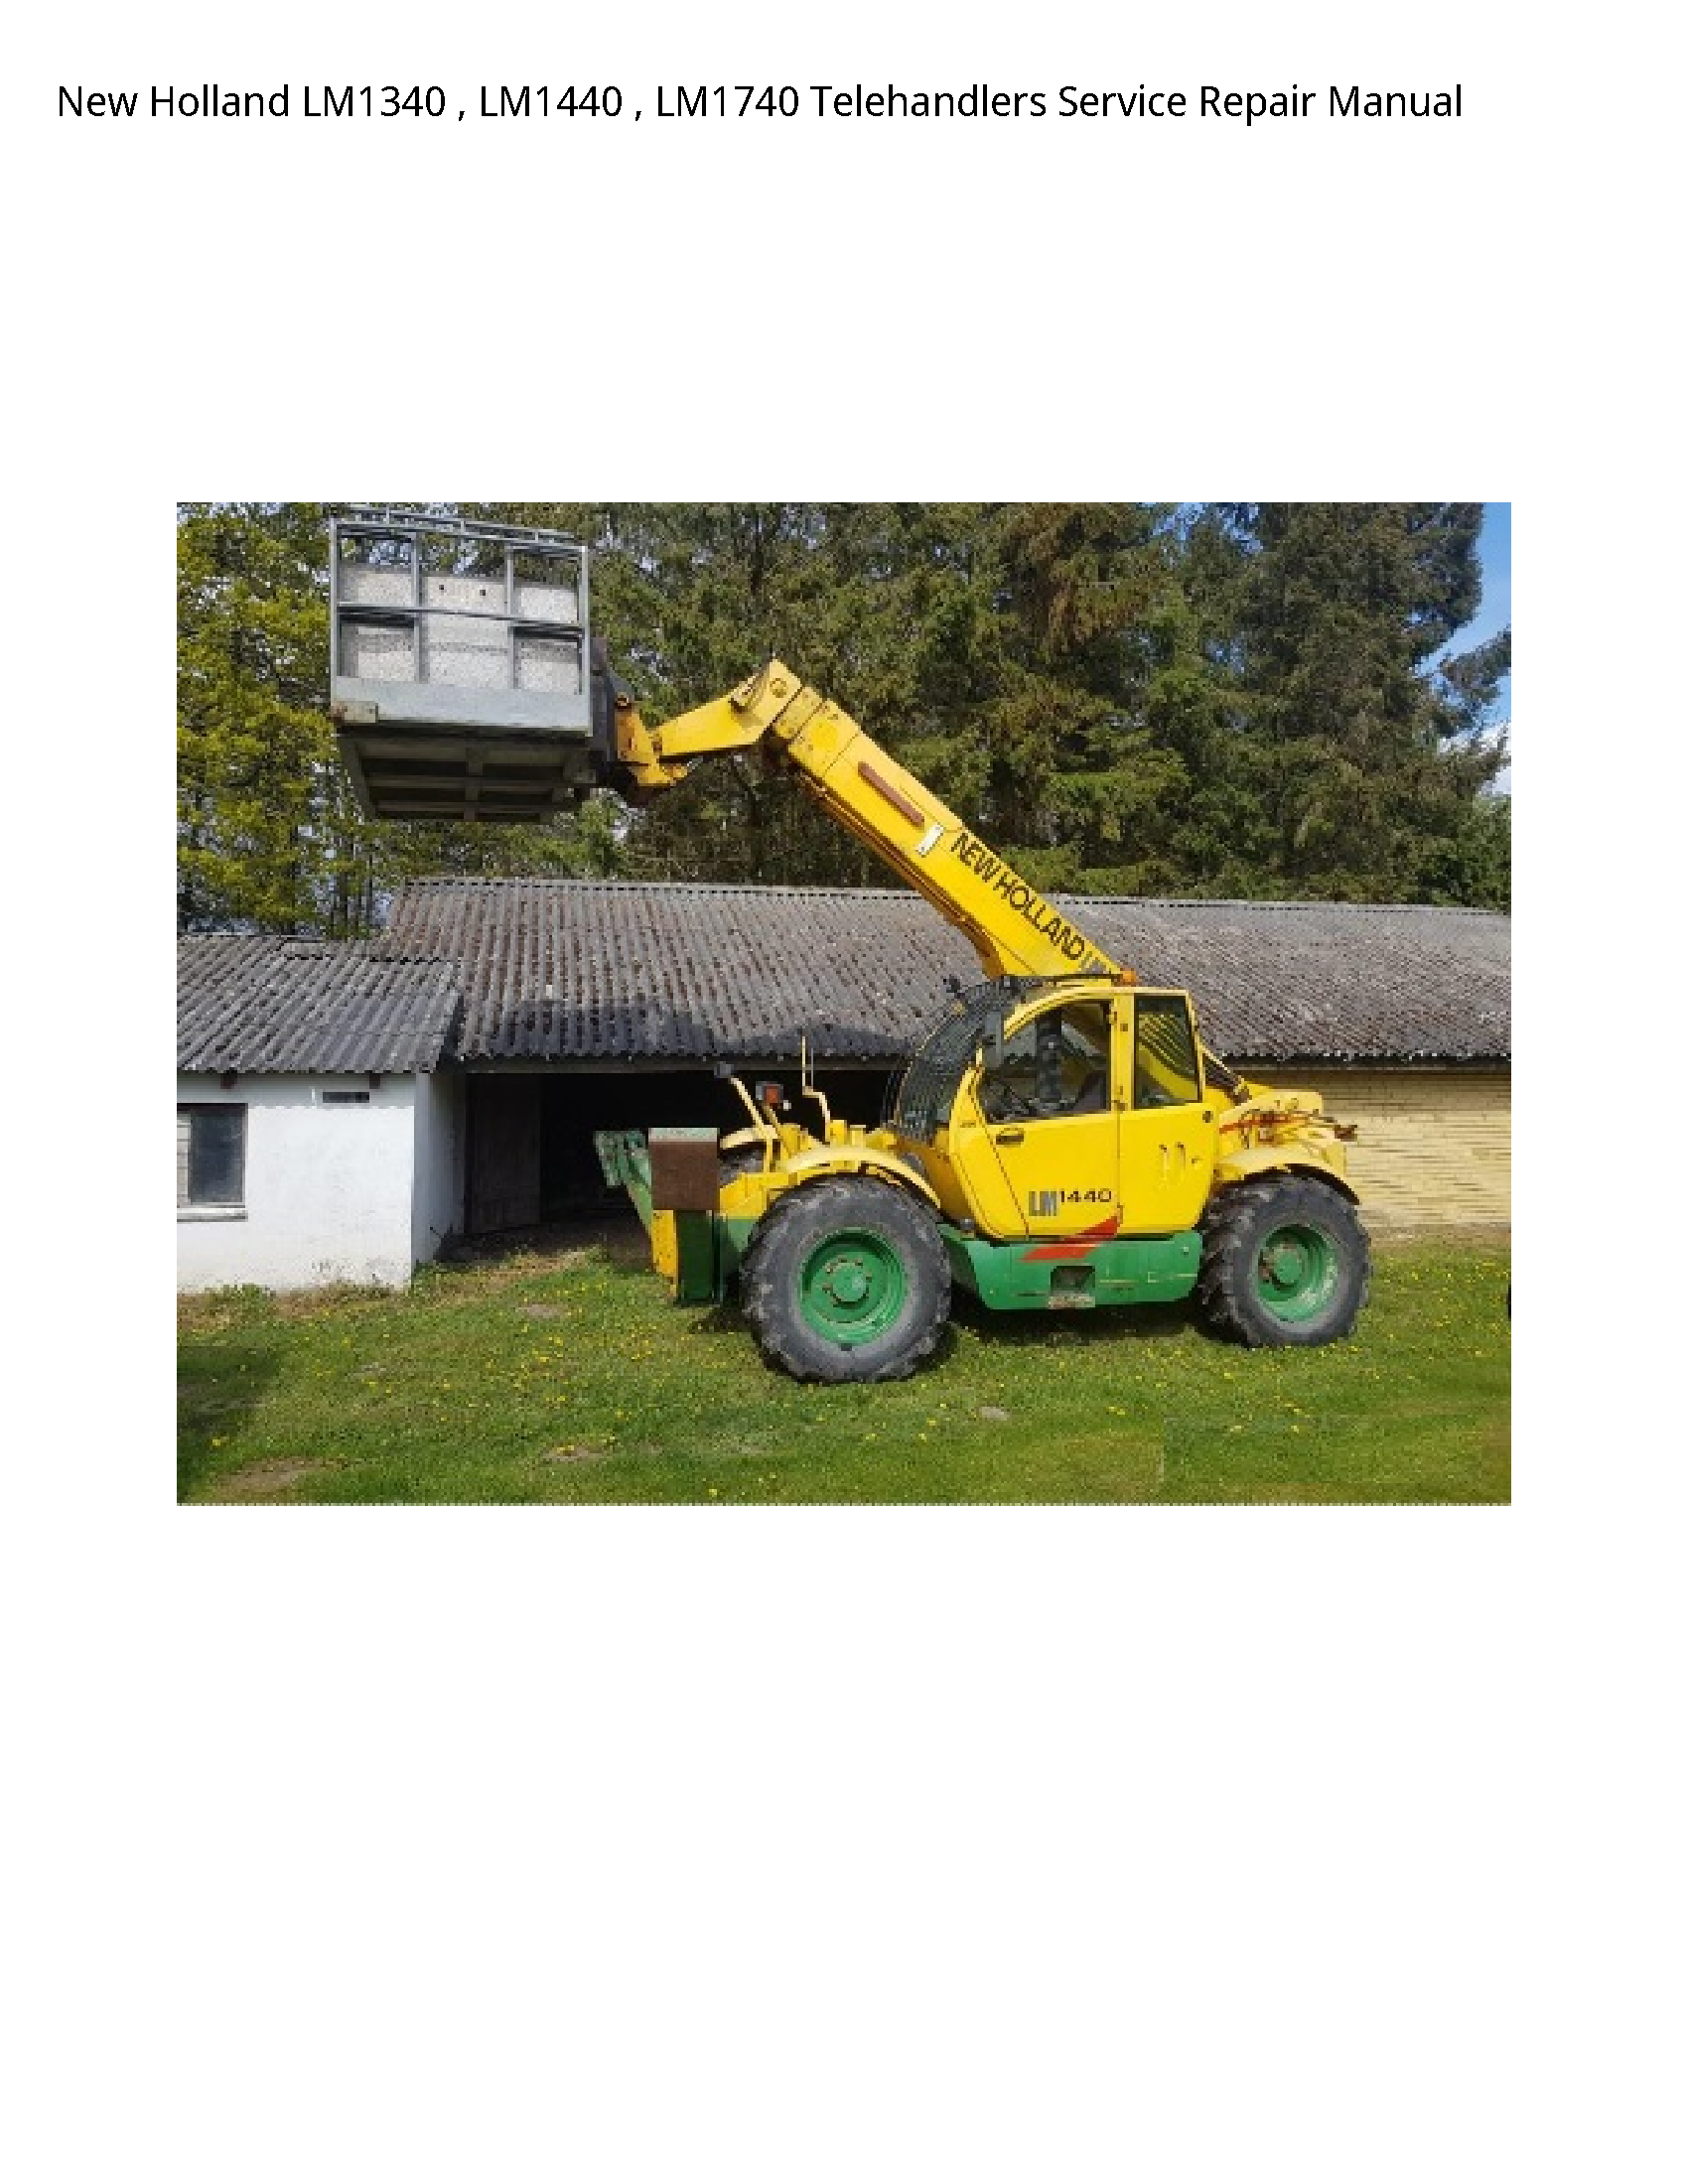 New Holland LM1340 Telehandlers manual